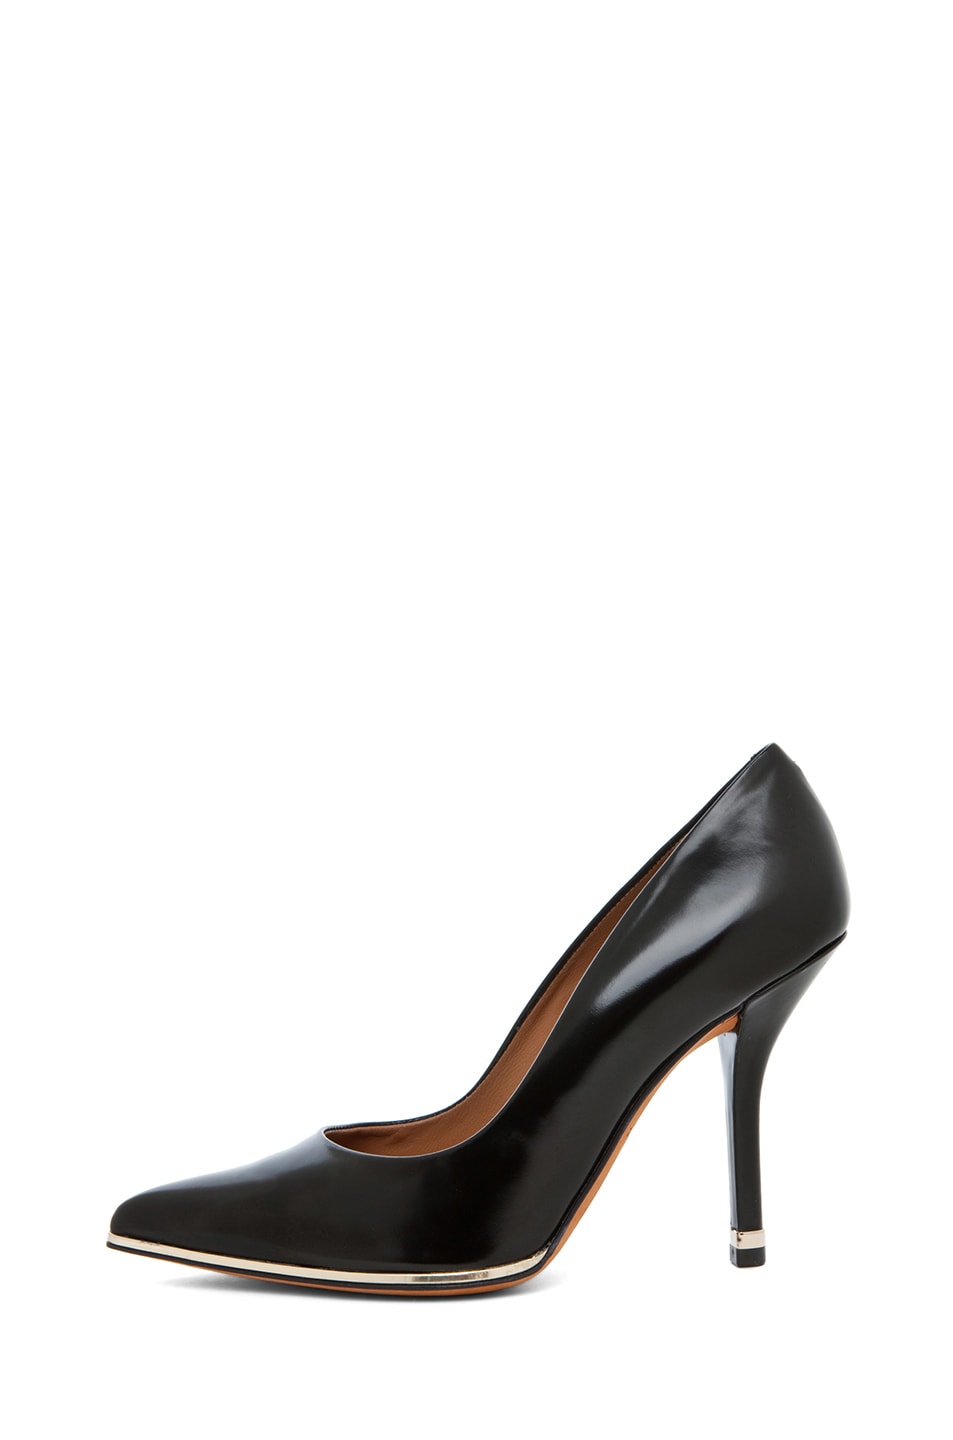 Givenchy Anuby Leather Classic Pumps in Black | FWRD